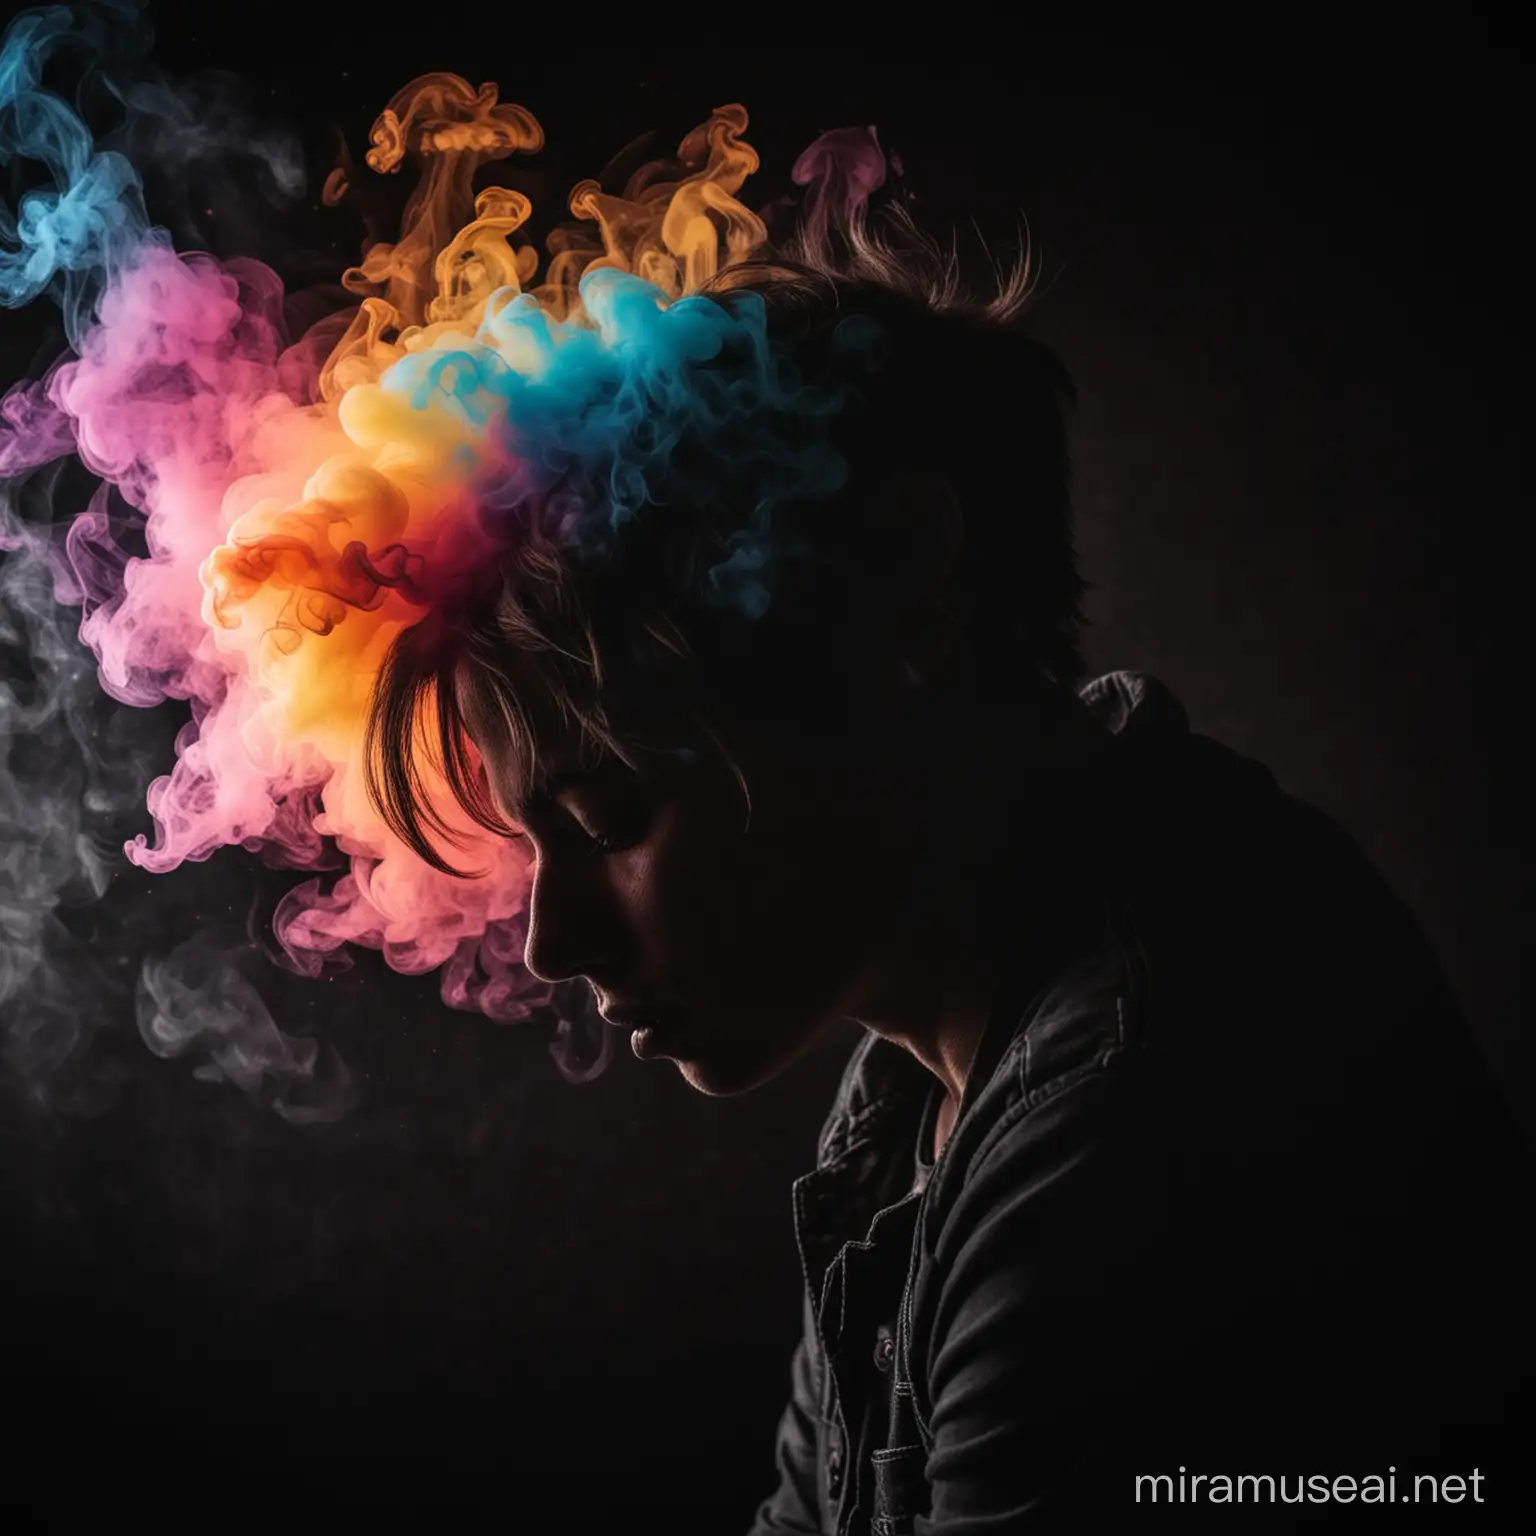 Close up silhouette of a person looking burned out and tired with colorful smoke rising in the black background; dark noir and depressing